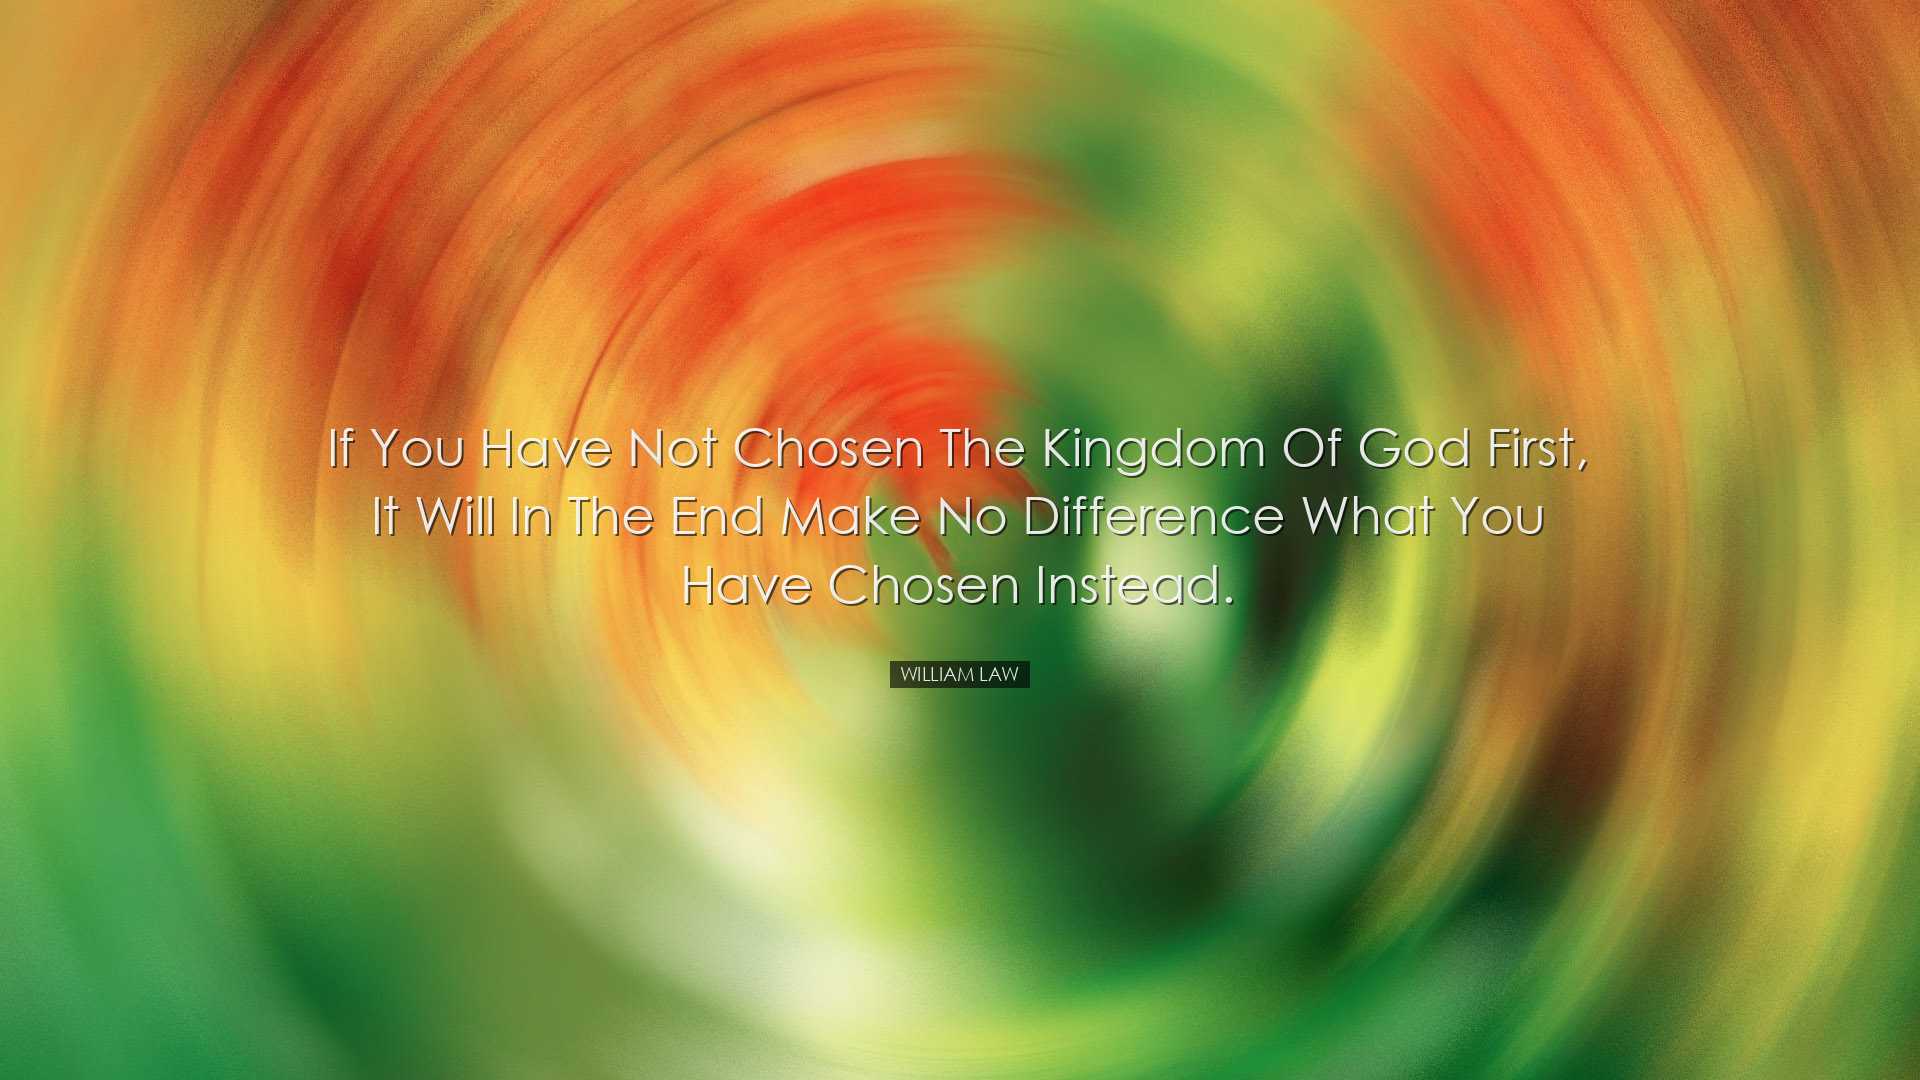 If you have not chosen the Kingdom of God first, it will in the en